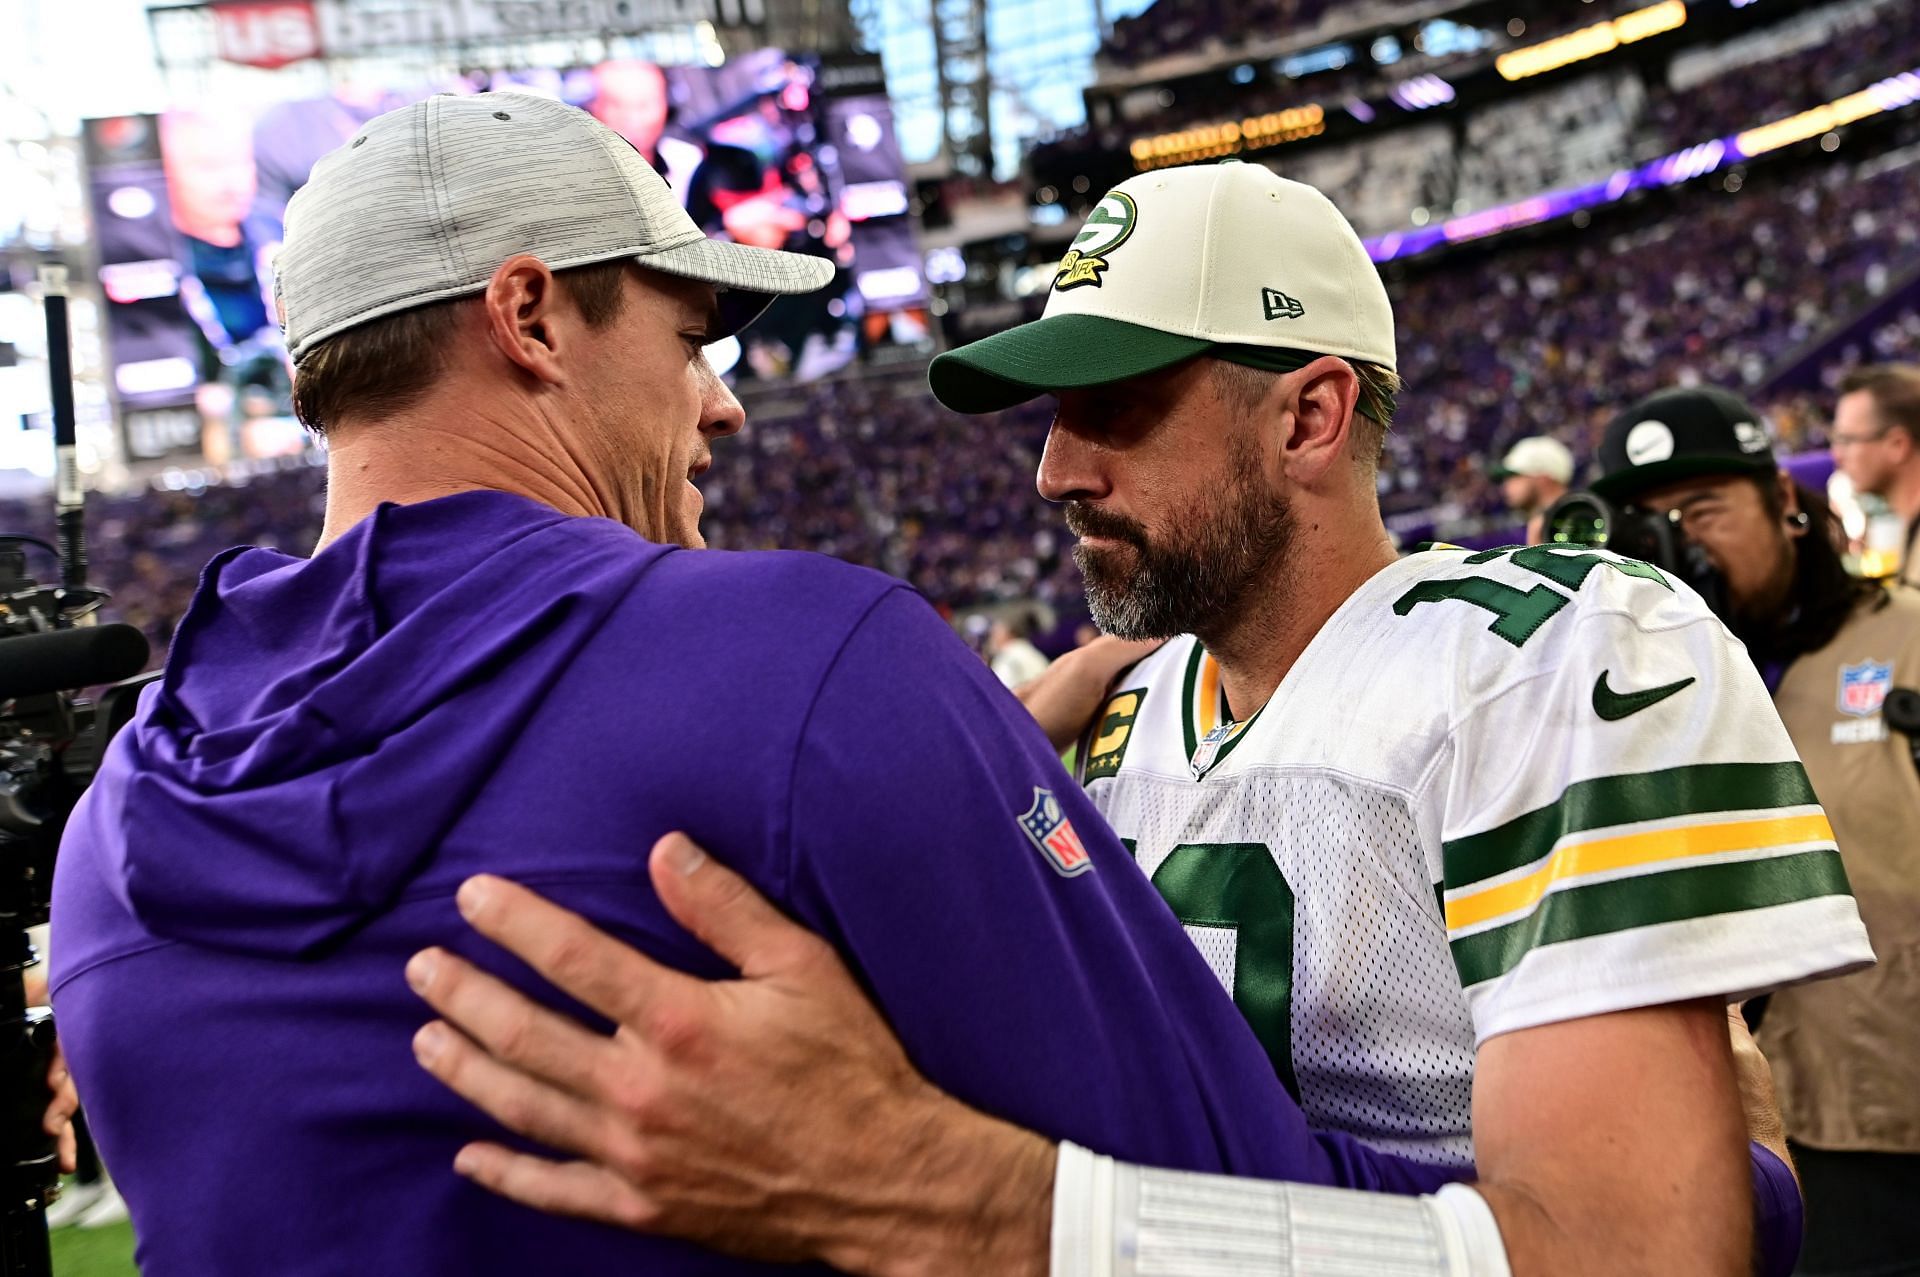 Aaron Rodgers of the Green Bay Packers (right) pictured during a clash against the Minnesota Vikings